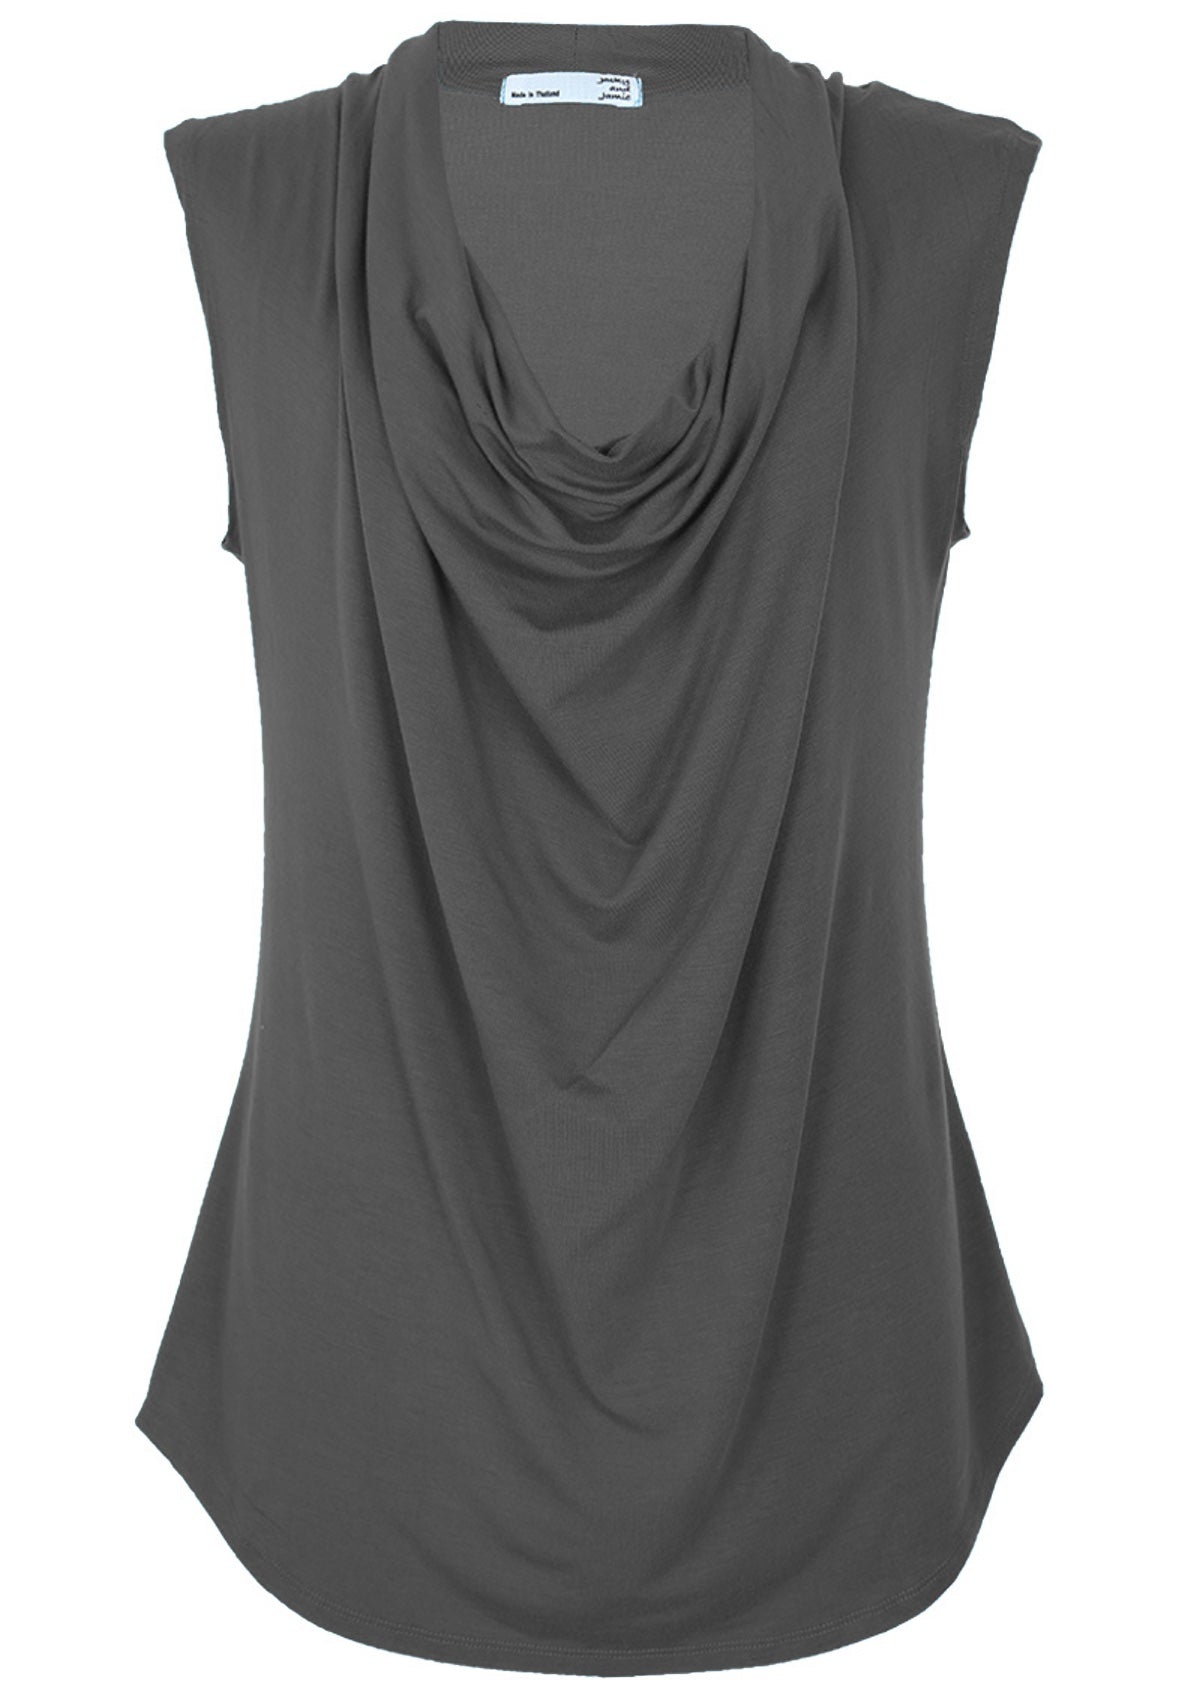 loose fit cowl neck women's top grey